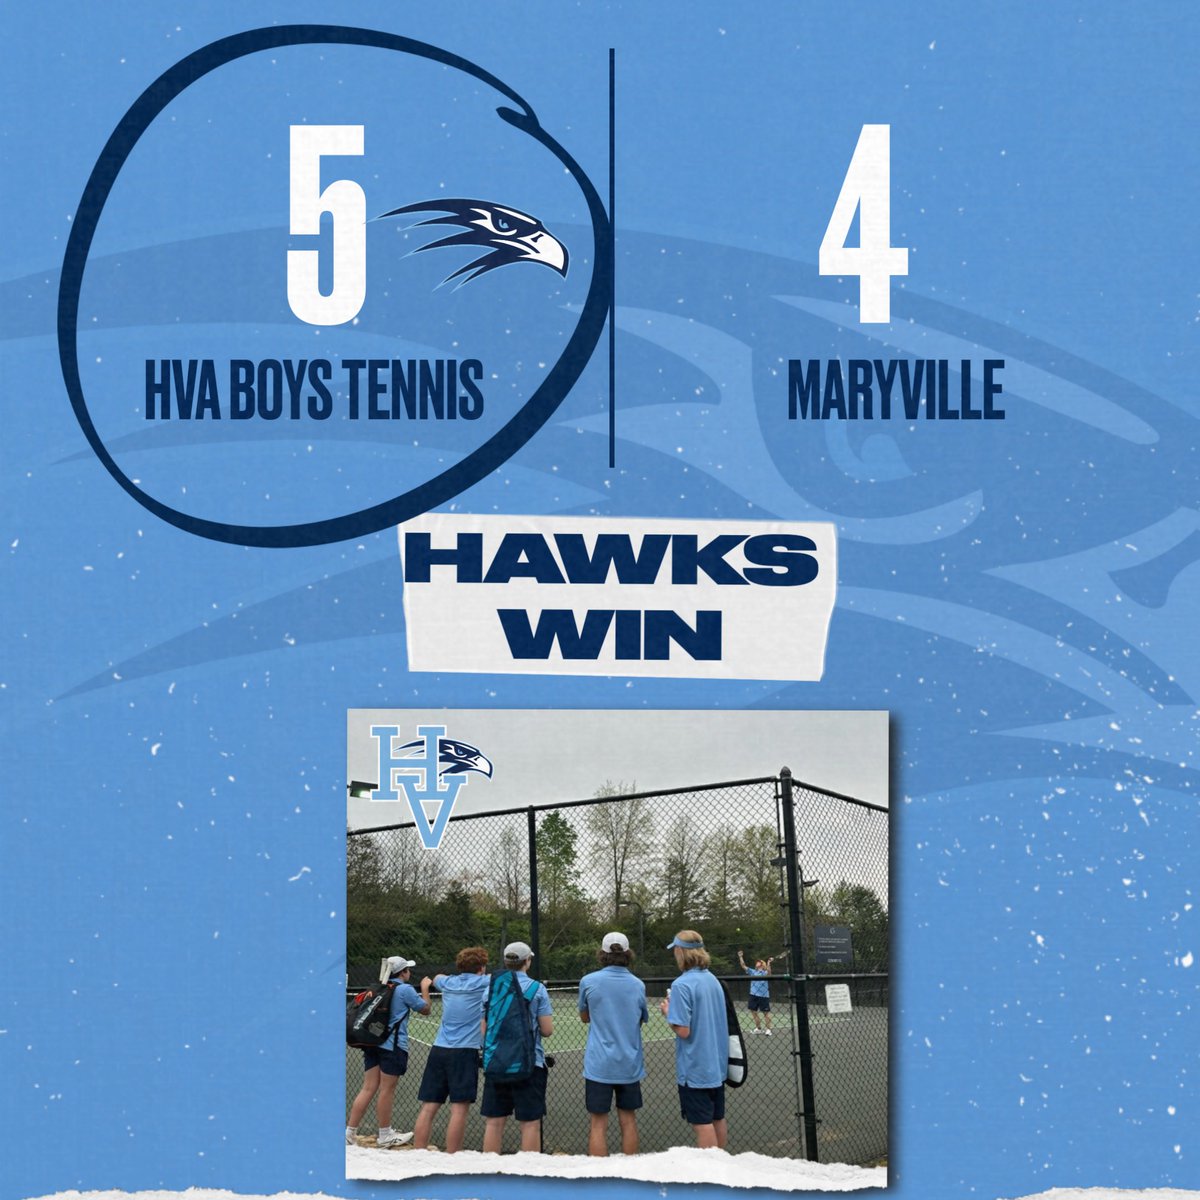 @5StarPreps @prepxtra HVA Boys Tennis with a win by a score of 5 matches to 4 over Maryville in a competitive well played match among both teams. Hawk magic 🎩🪄for a 5-4 final score 🎾